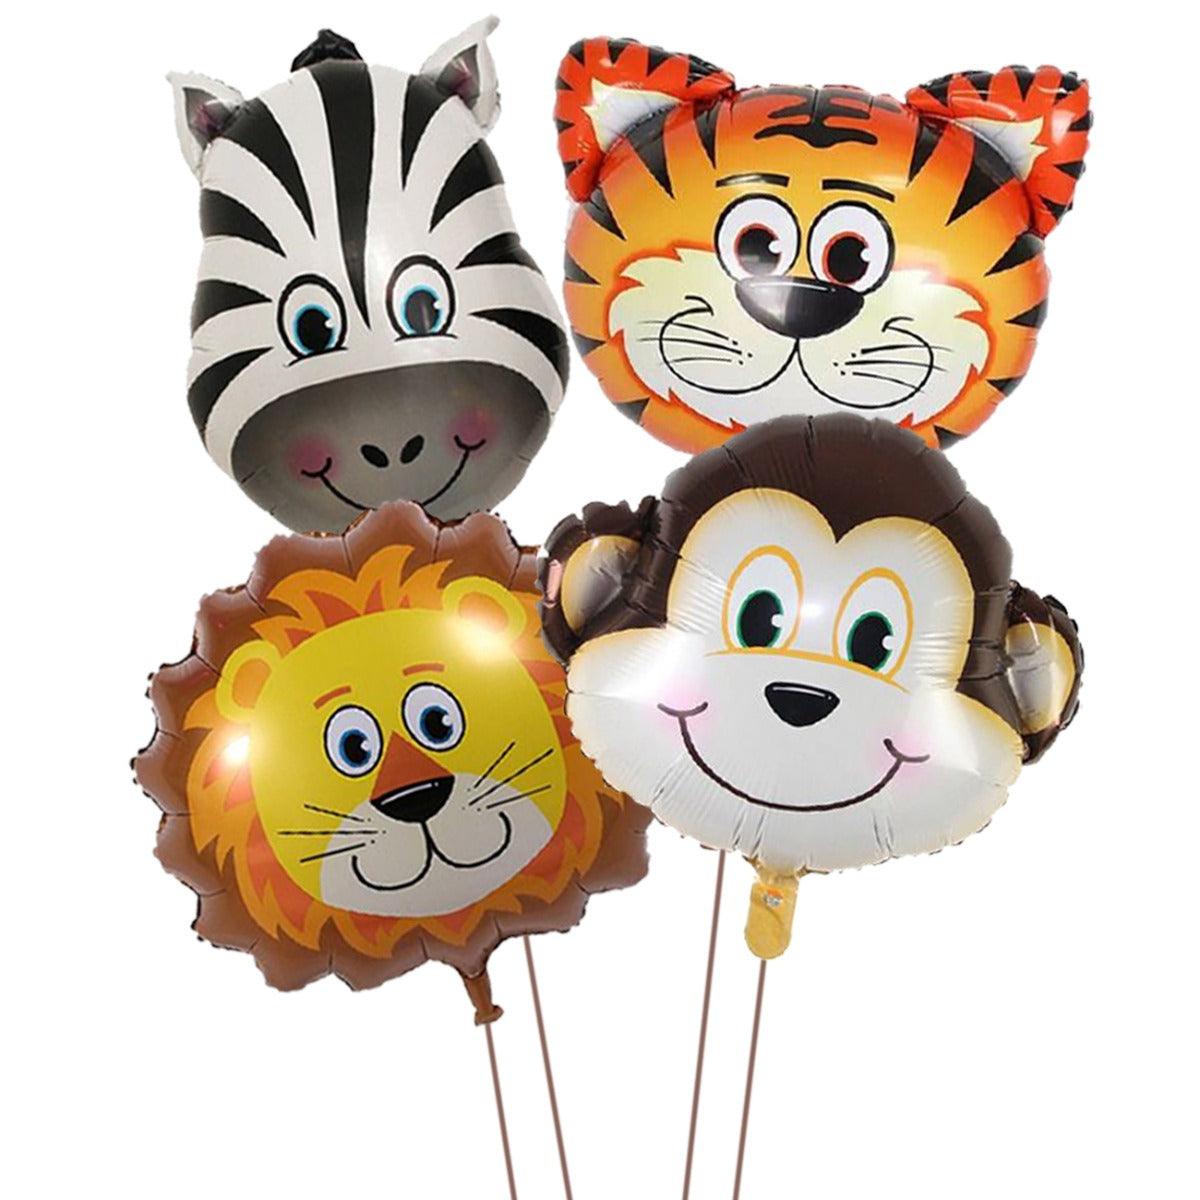 Jungle　Zebra)　Price　FunCorp　Tiger,　Of　Decoration　Buy　India　Foil　in　Head　Balloons,　PartyCorp　–　Theme　Animal　Online　Monkey,　Shaped　at　Lion,　Pack　Best　India